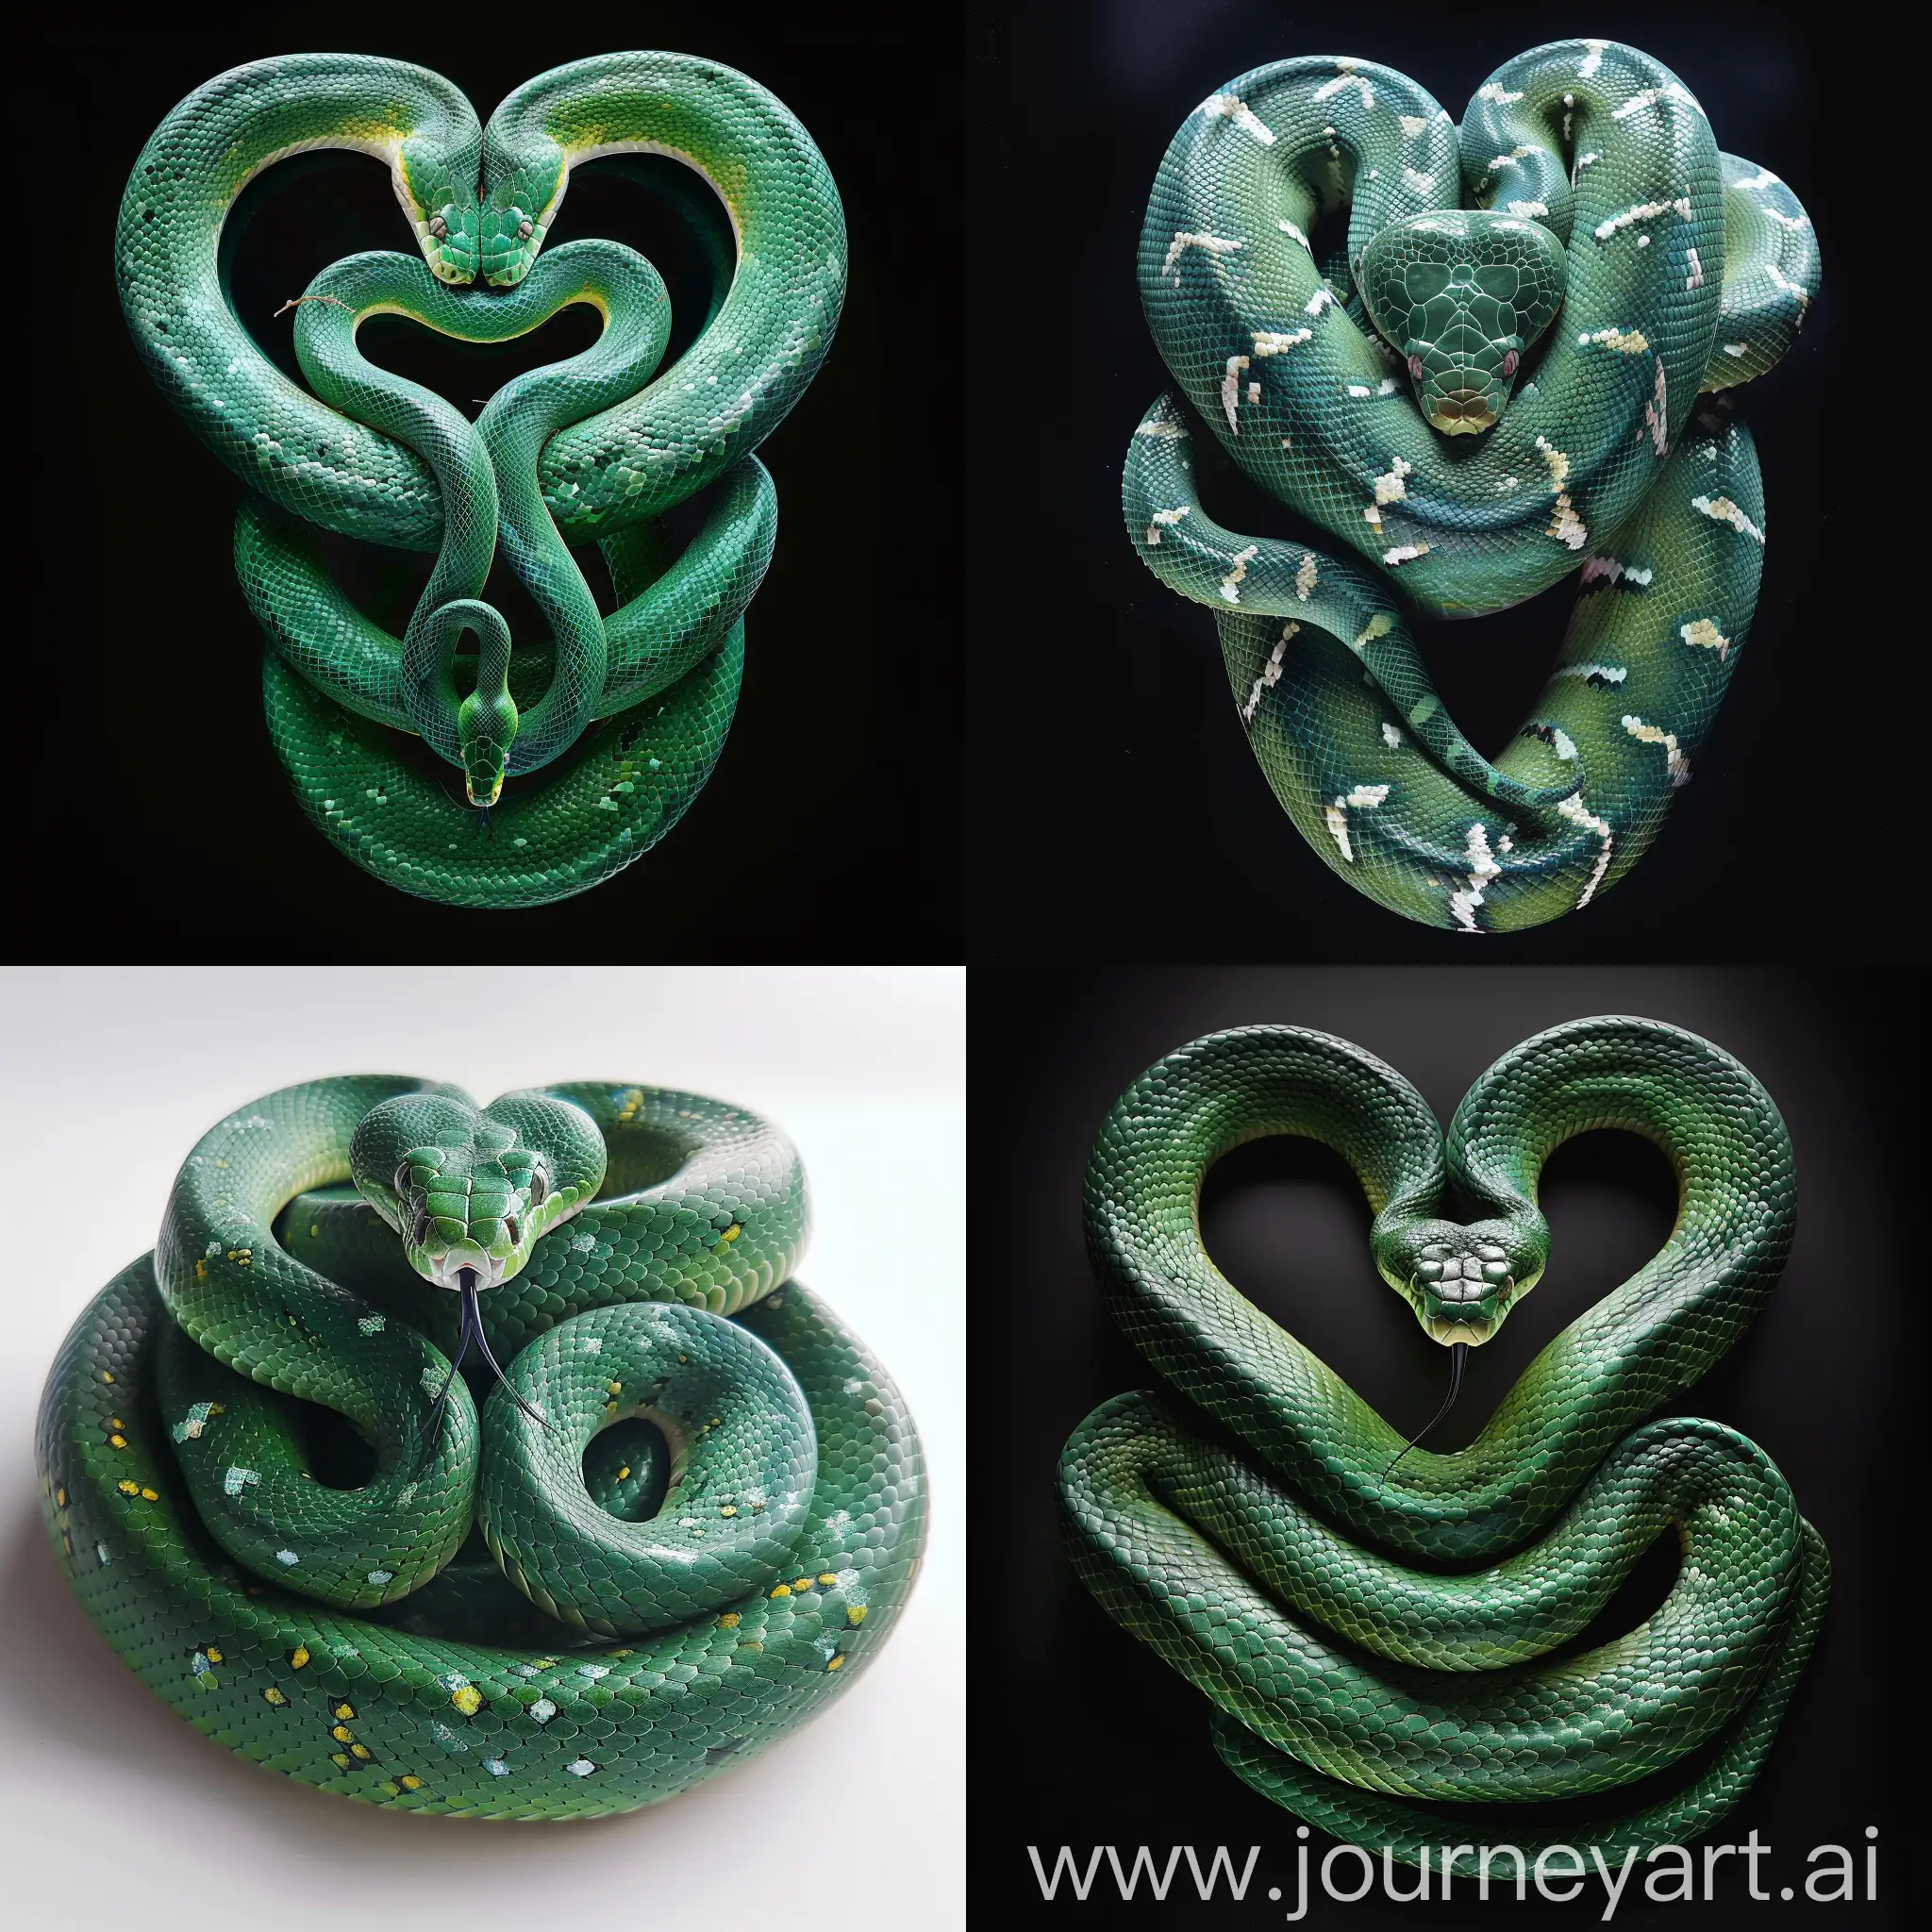 EmeraldColored-Snake-Coiled-Heart-Sculpture